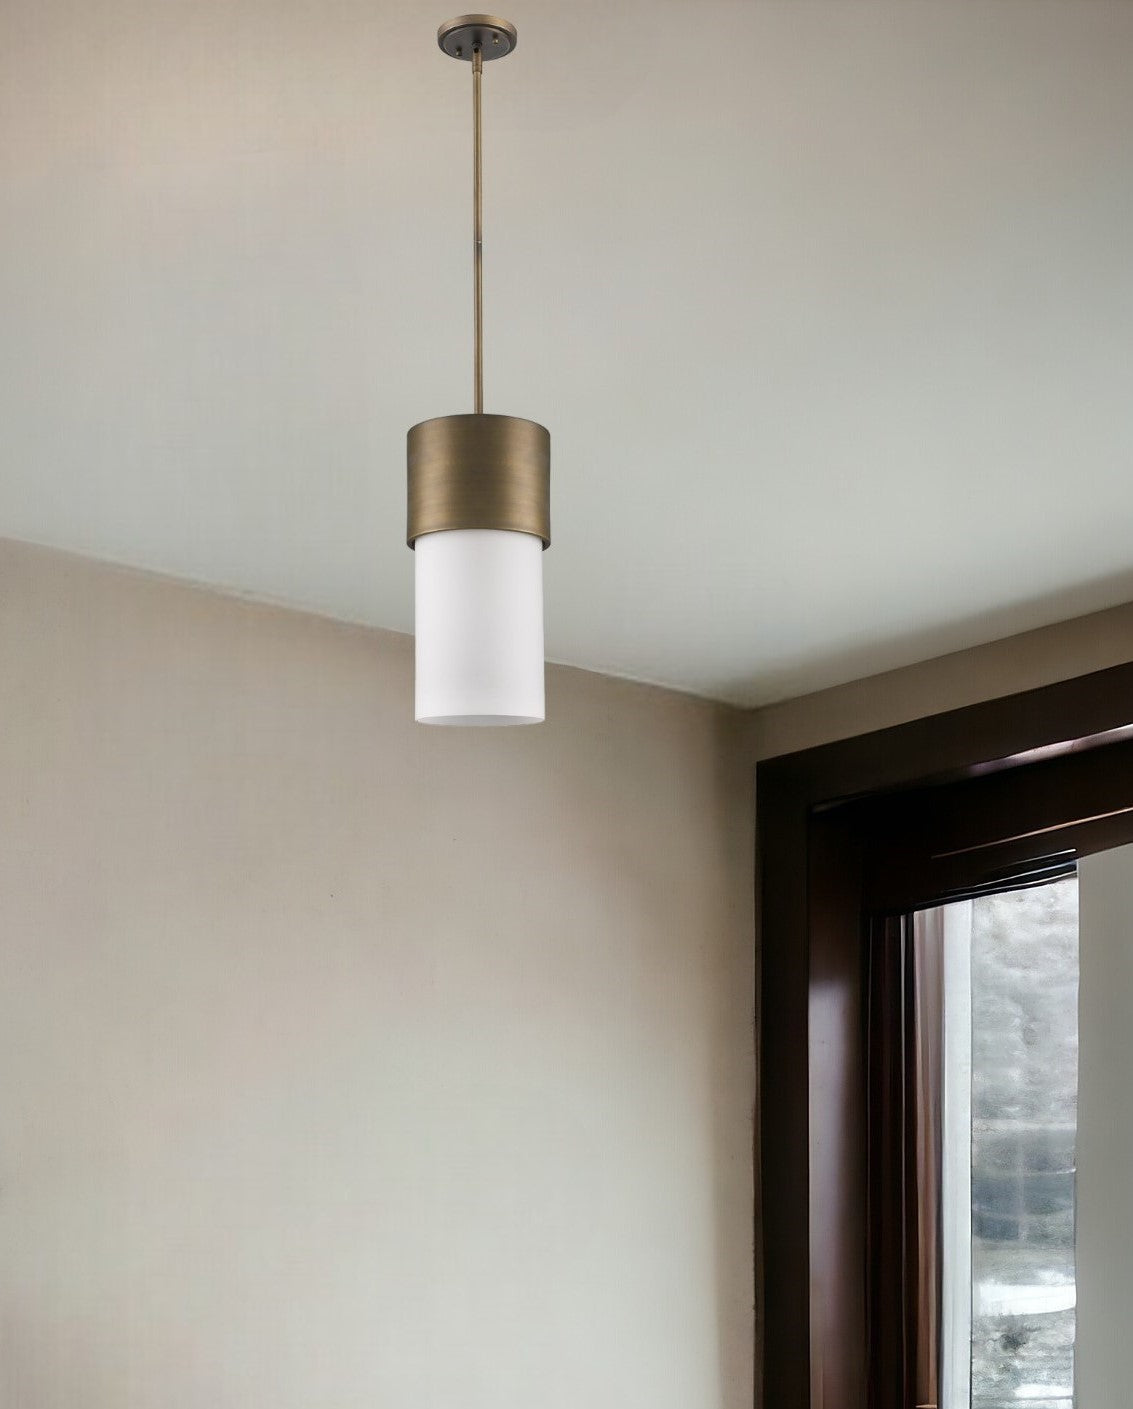 Midtown 1-Light Raw Brass Pendant With Frosted Glass Shade